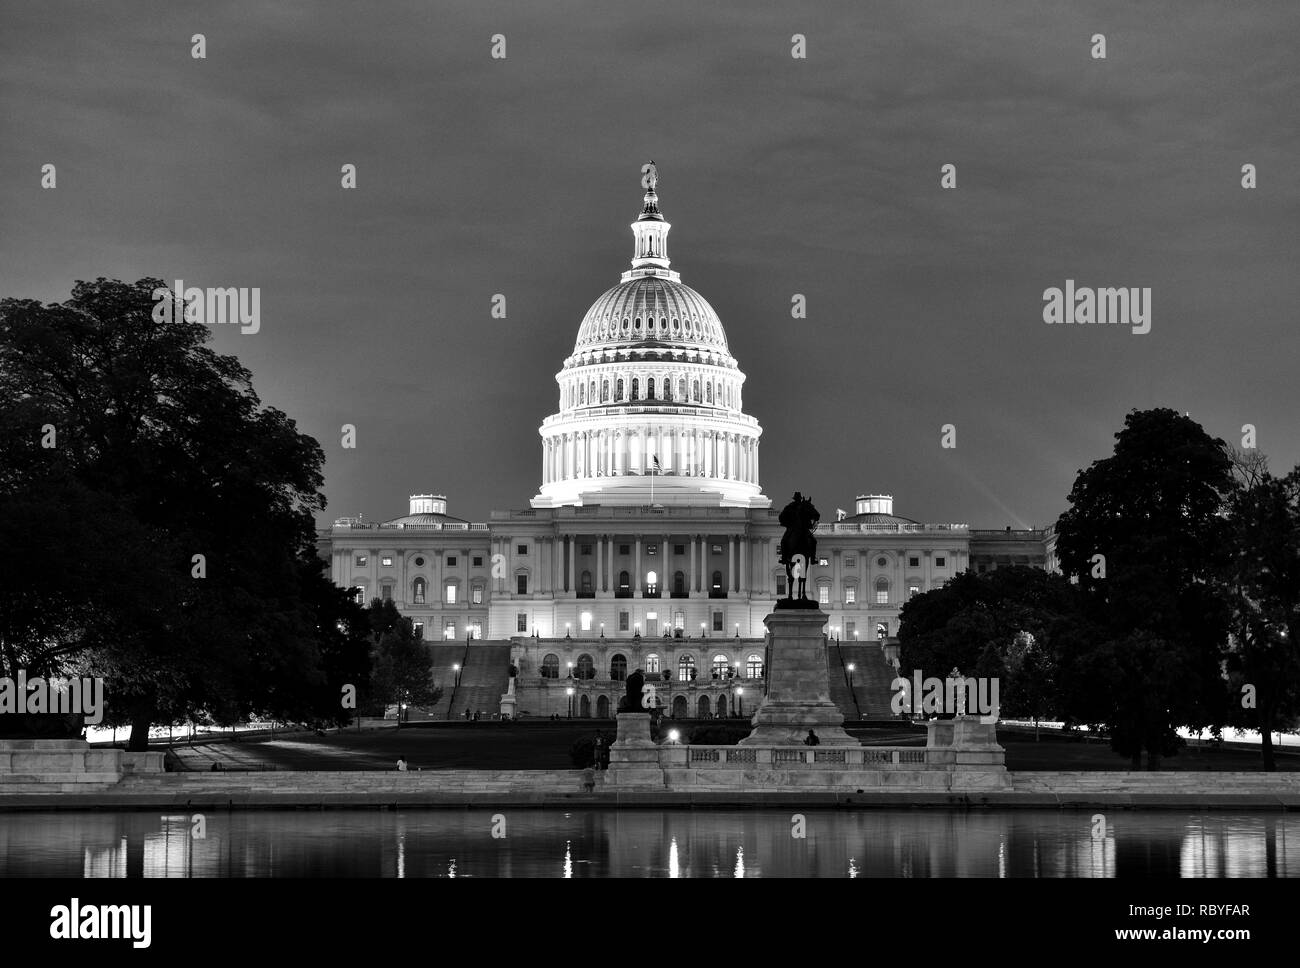 United States Capitol Building at night, Washington, DC Banque D'Images